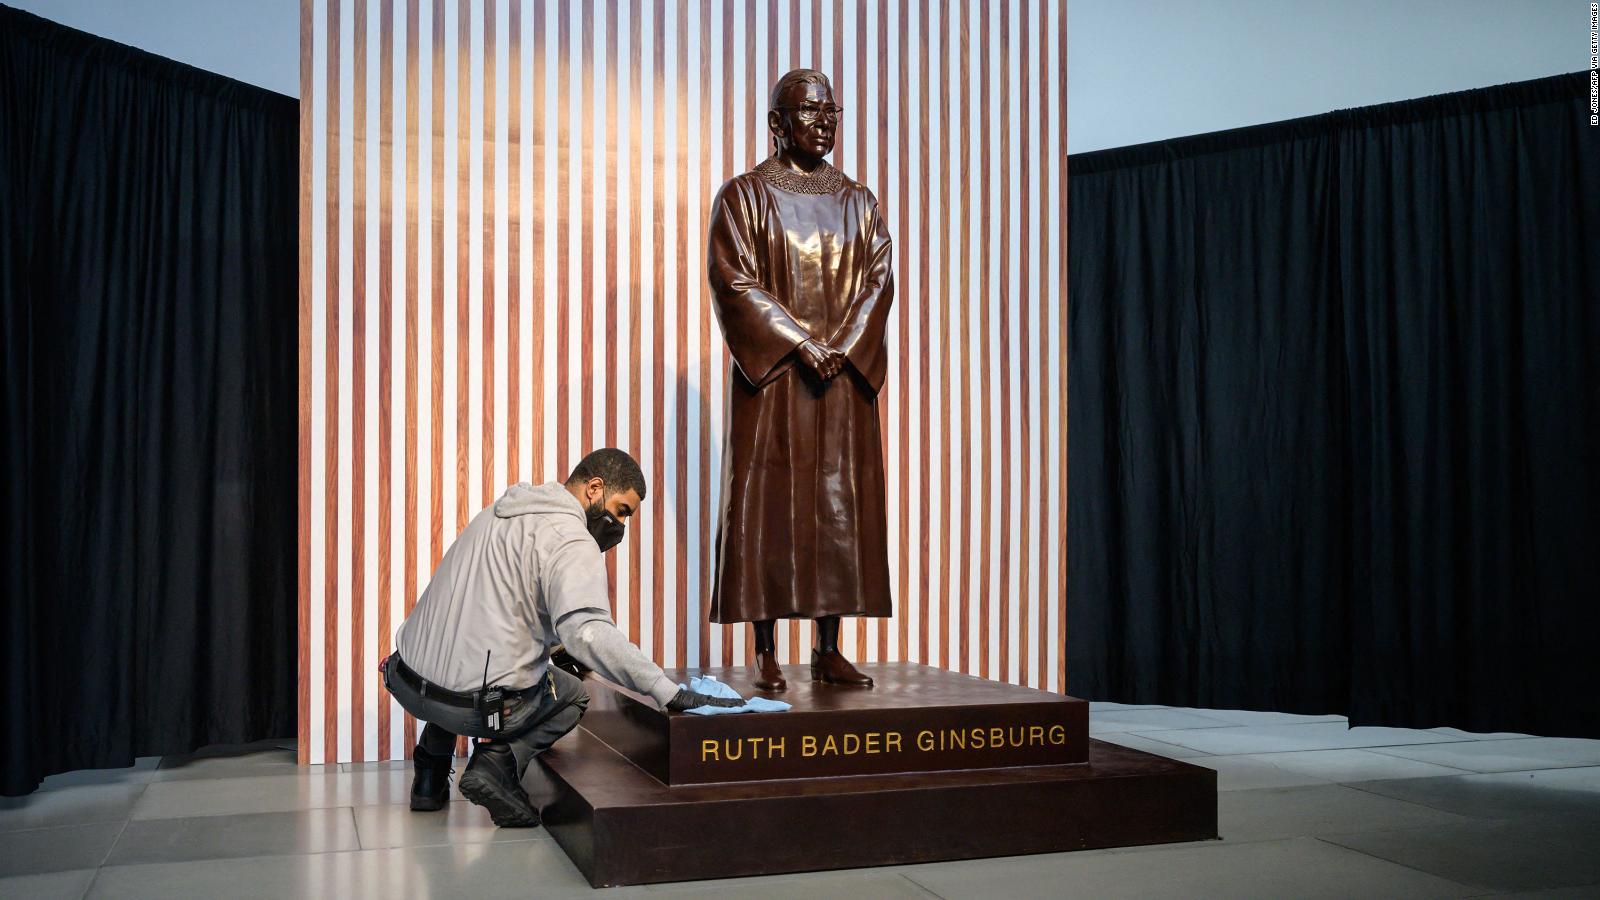 Hometown hero Ruth Bader Ginsburg honored with bronze statue in